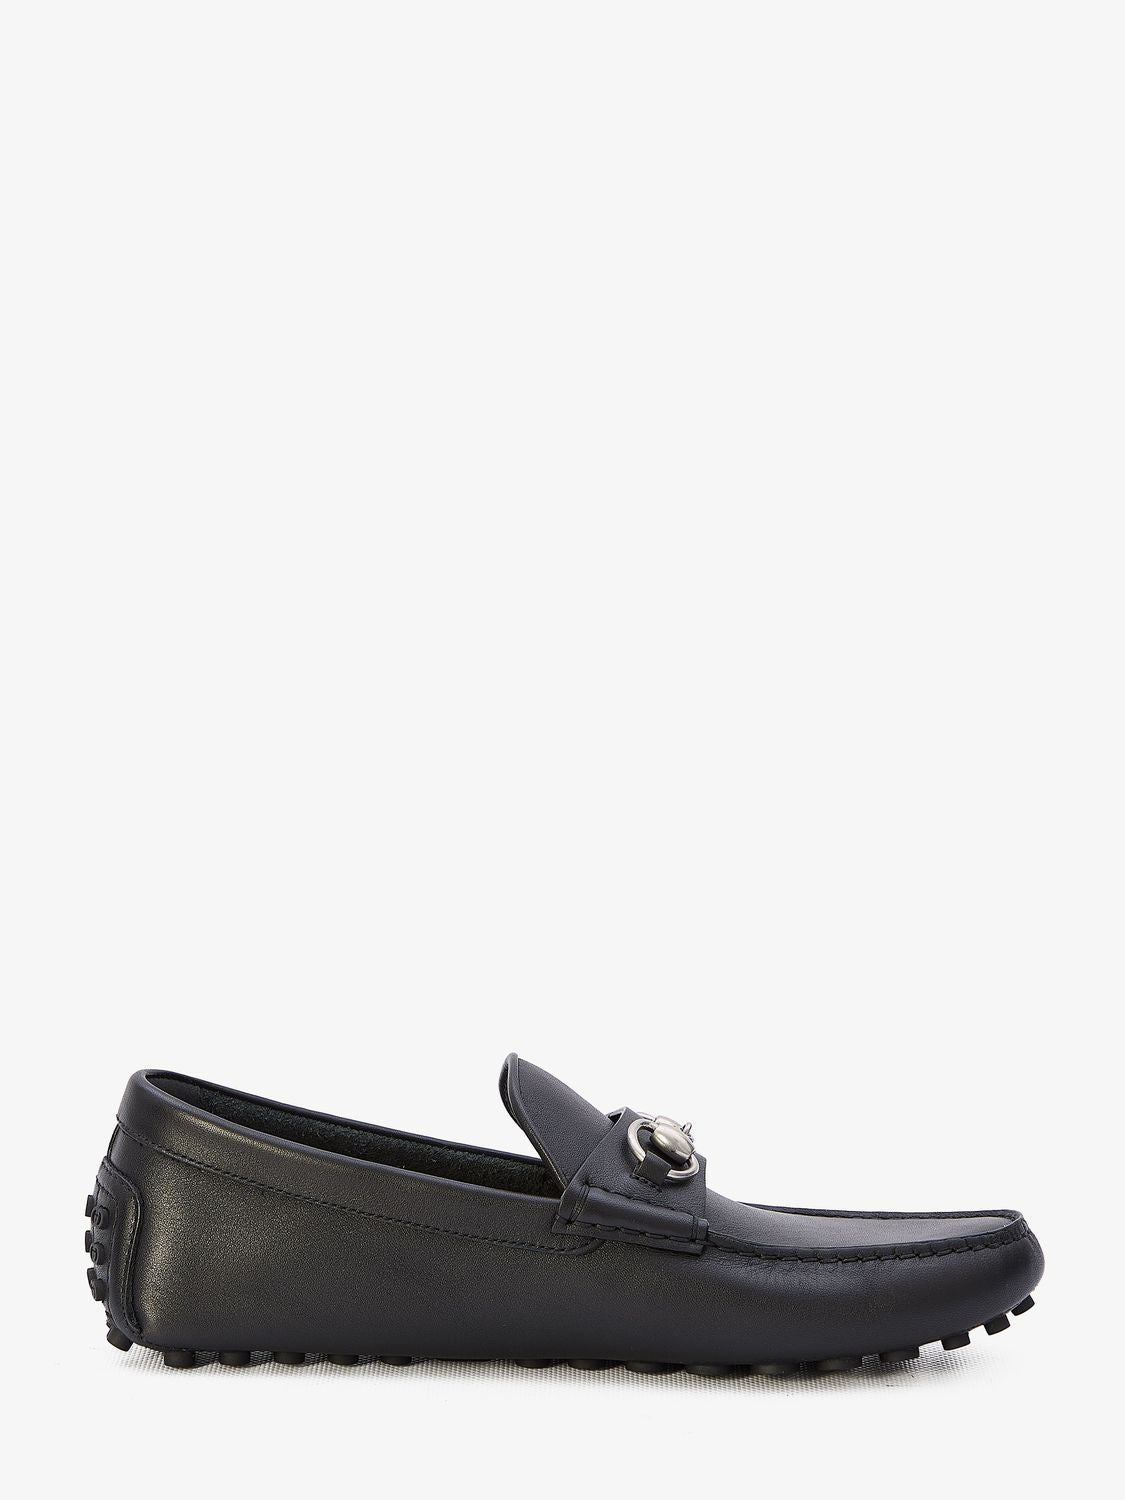 GUCCI Men's Black Leather Loafers with Silver Horsebit Detail